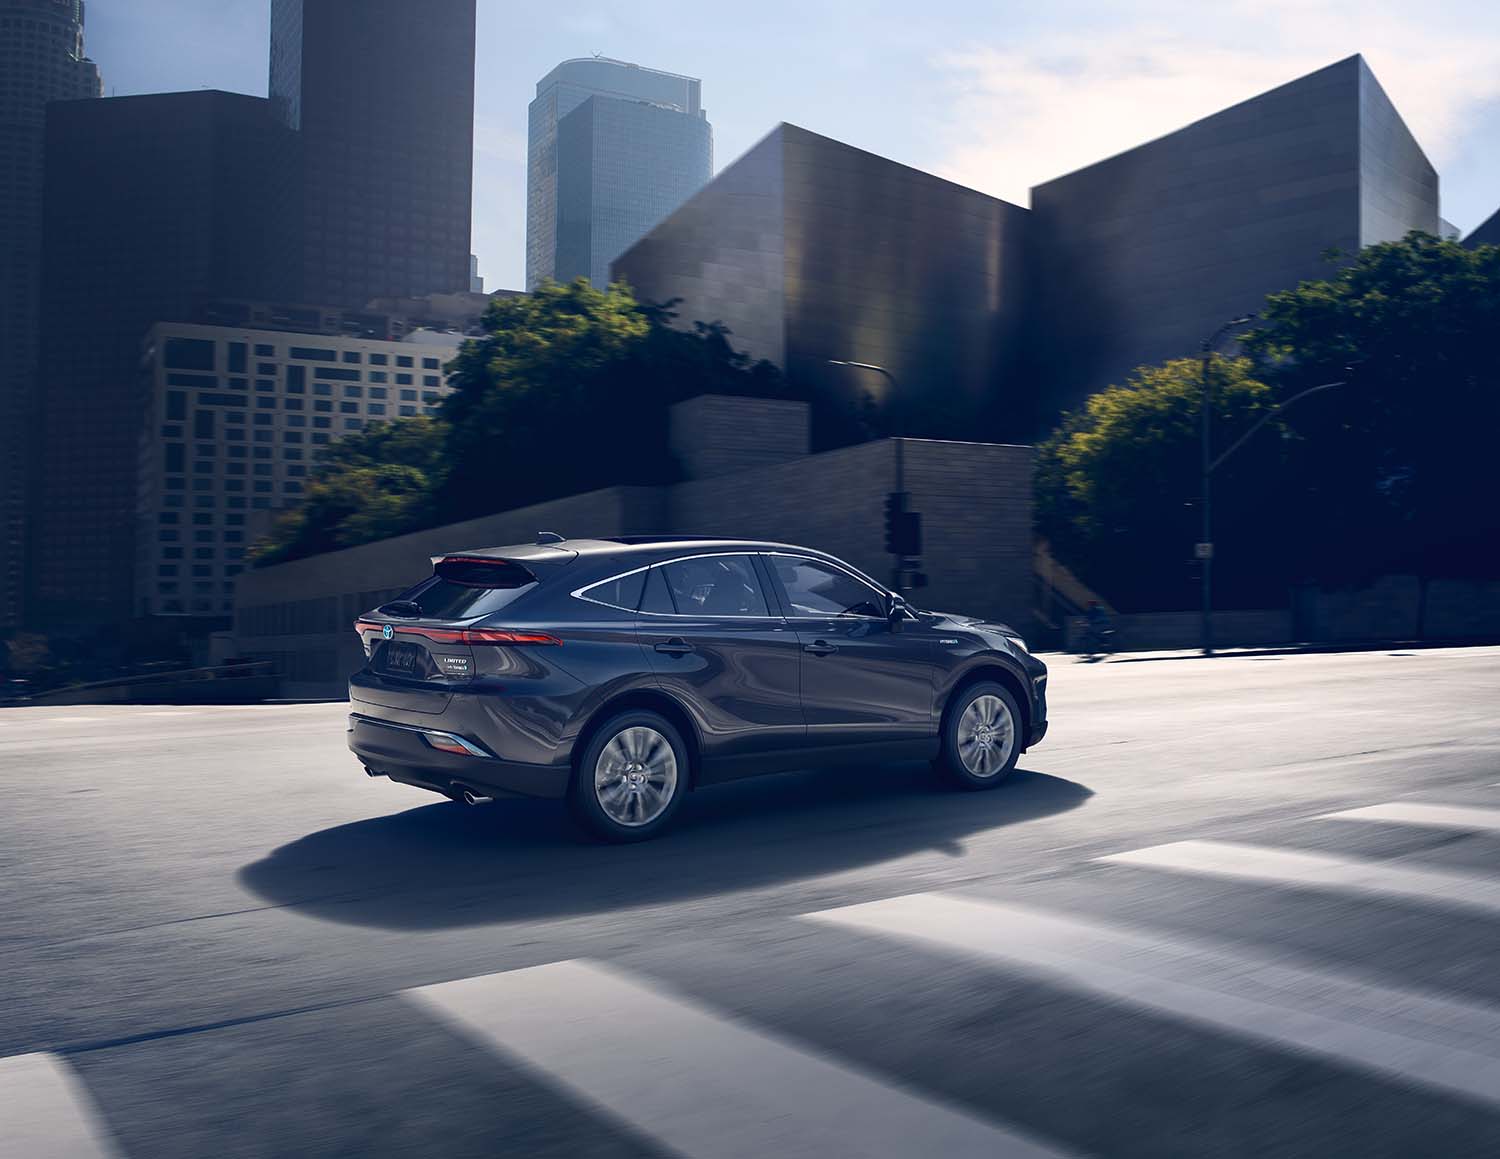 Toyota Hybrid for Everyone at Bennett Toyota | 2021 Toyota Venza driving through the city